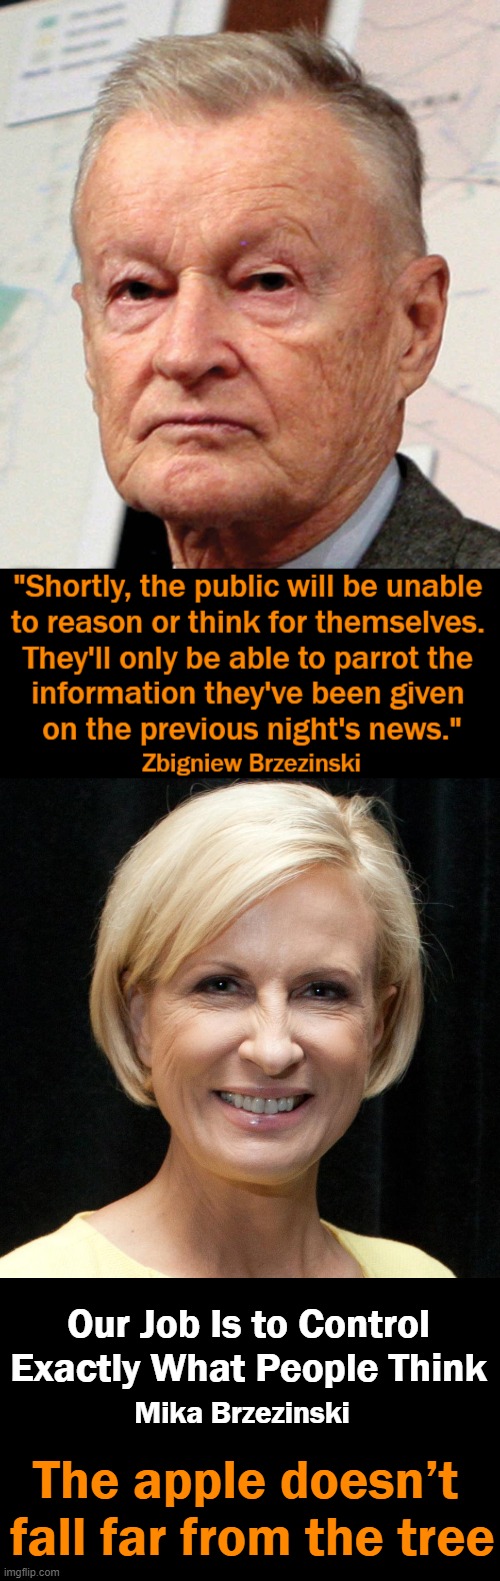 Daddy's Little Parrot | Our Job Is to Control Exactly What People Think; Mika Brzezinski; The apple doesn’t 
fall far from the tree | image tagged in politics,mind control,thoughts,disinformation,mainstream media,thought police | made w/ Imgflip meme maker